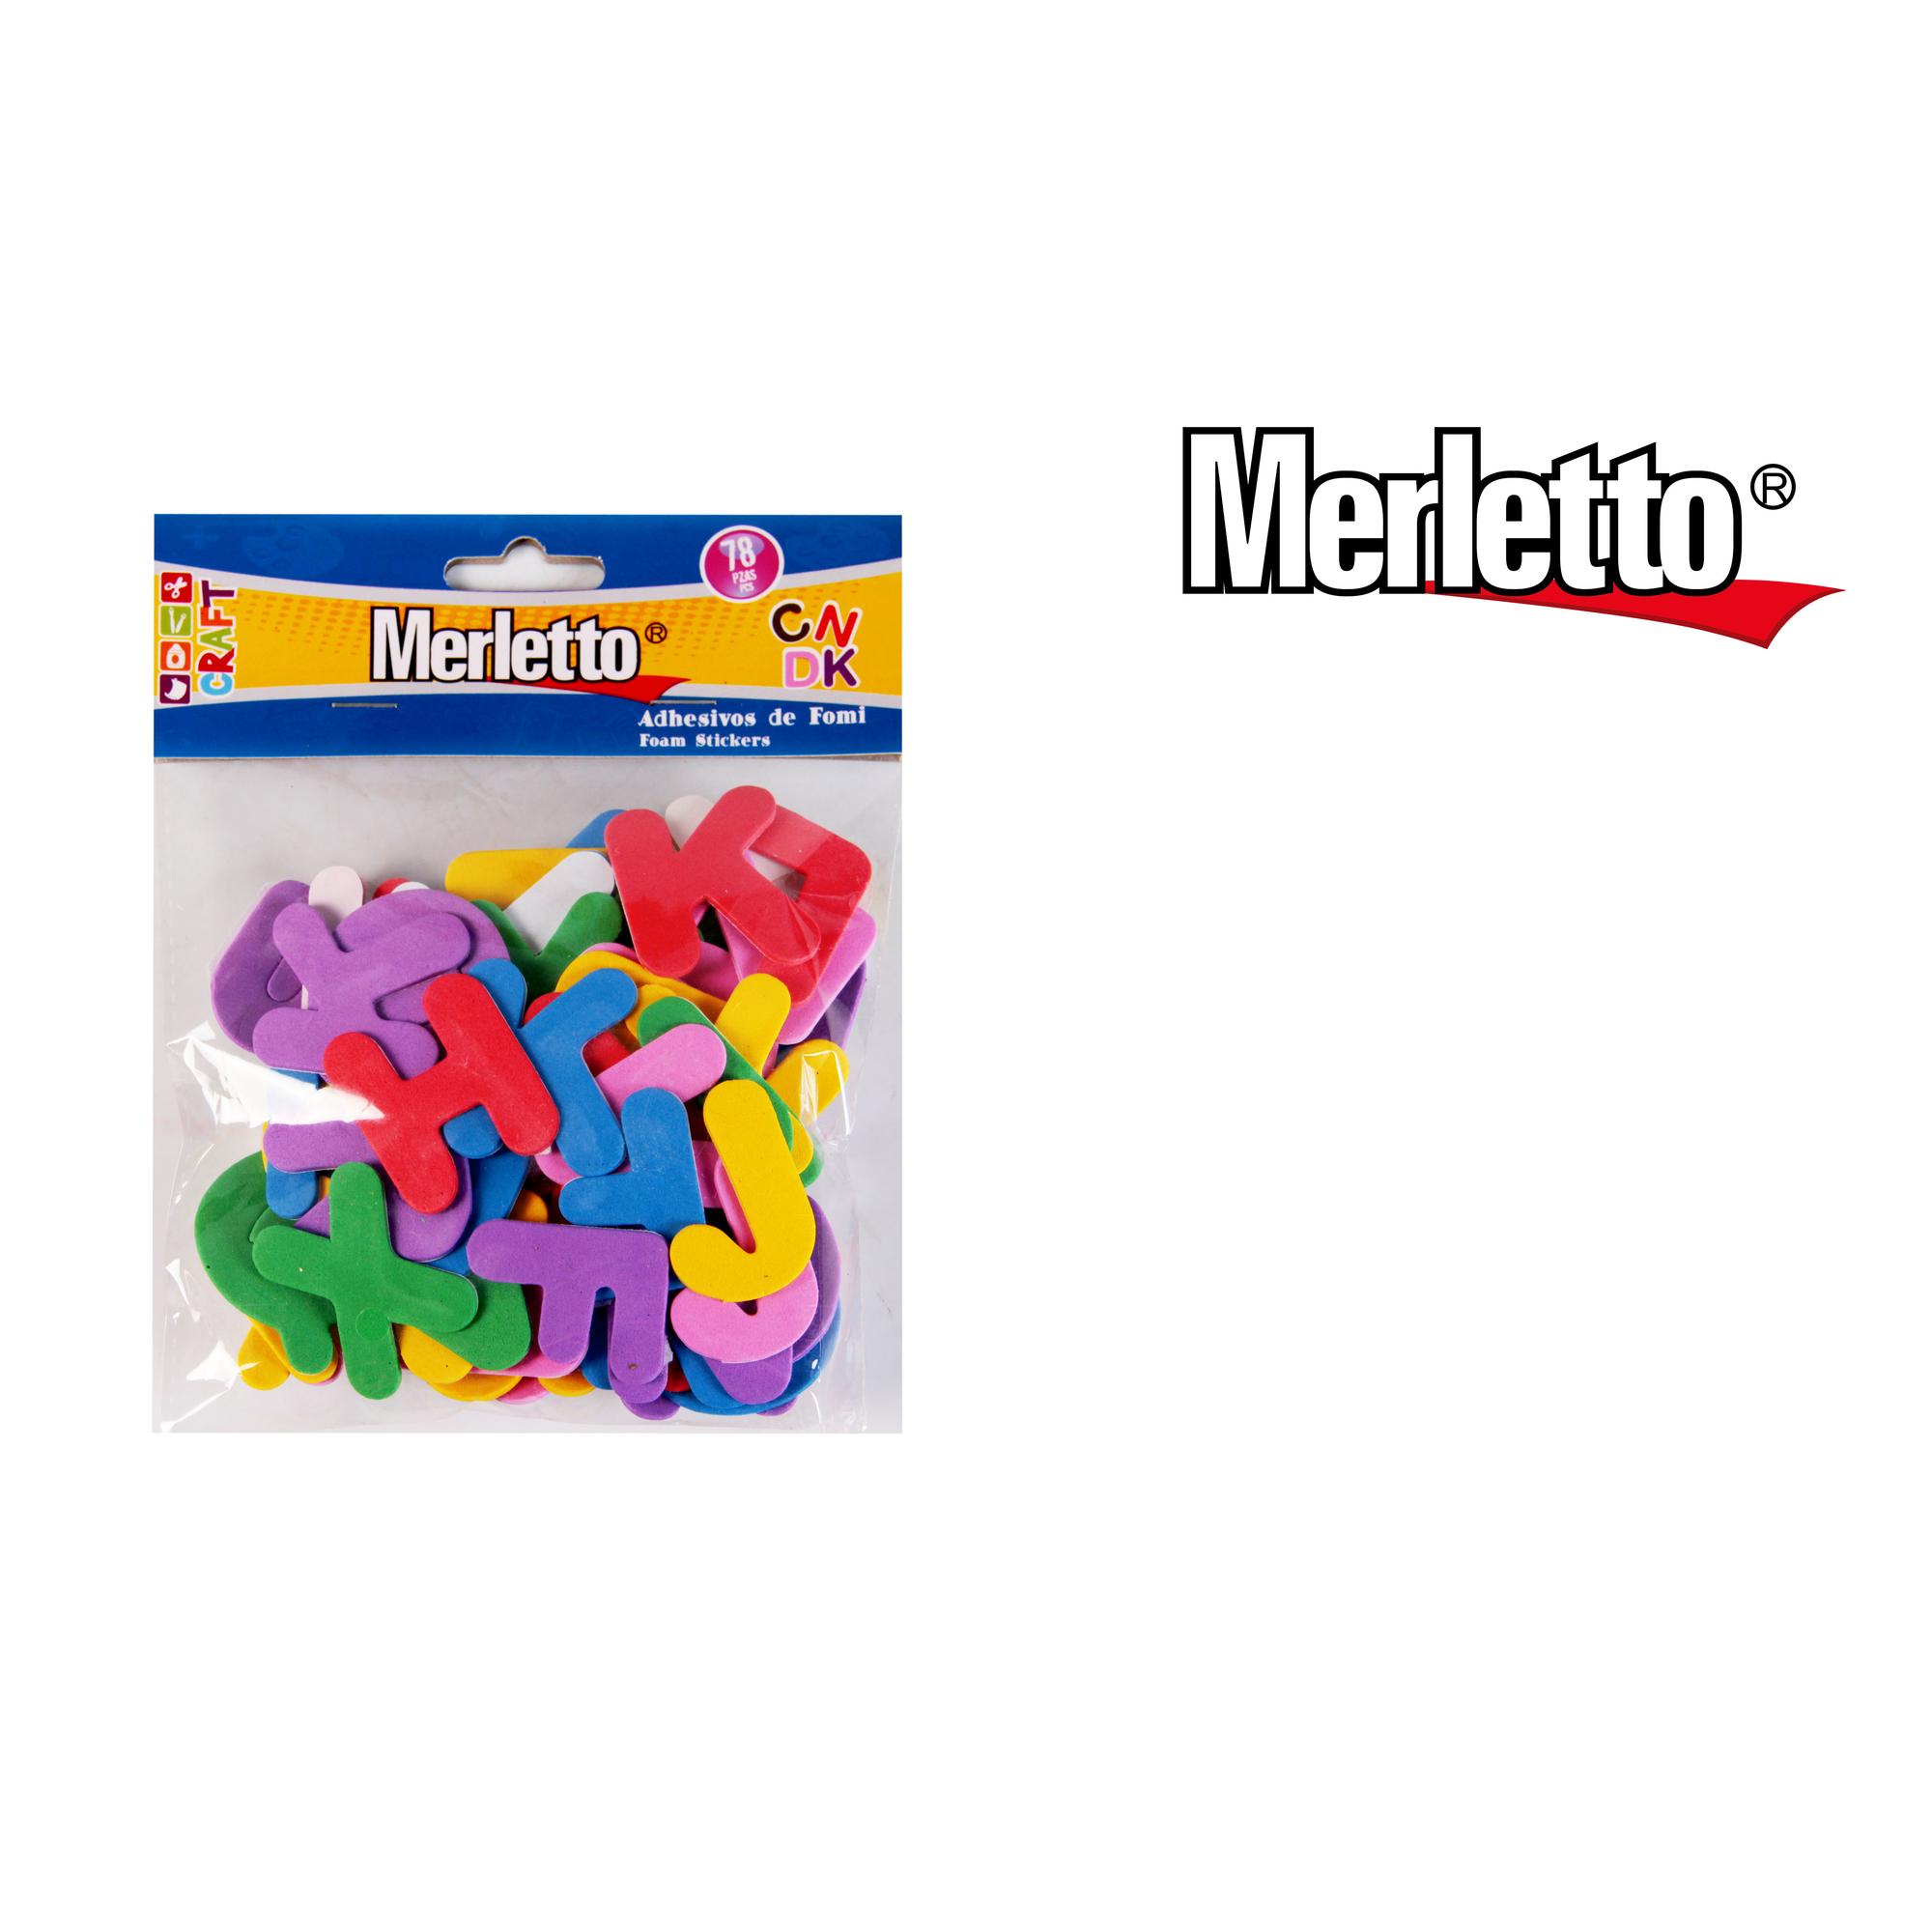 FROSTED ALPHABET LETTERS 78 PCS 6 ASSORTED COLORS - 785-7494043